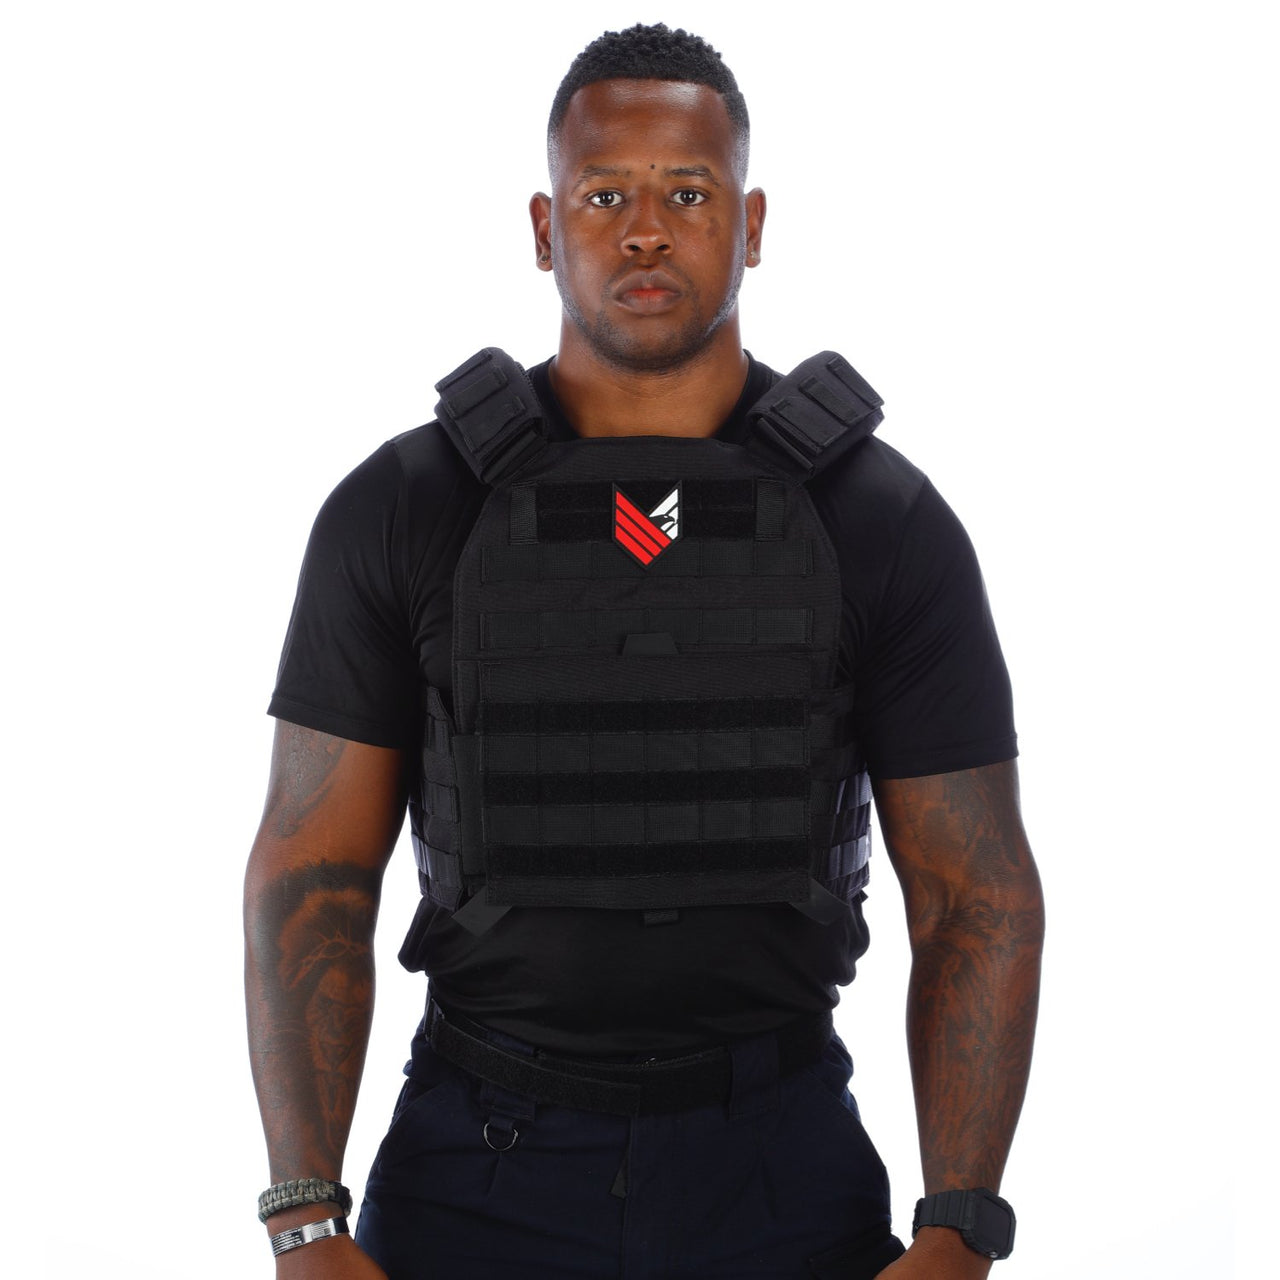 A man wearing a Body Armor Direct Advanced Body Armor Plate Carrier with Cummerbund posing in front of a white background.